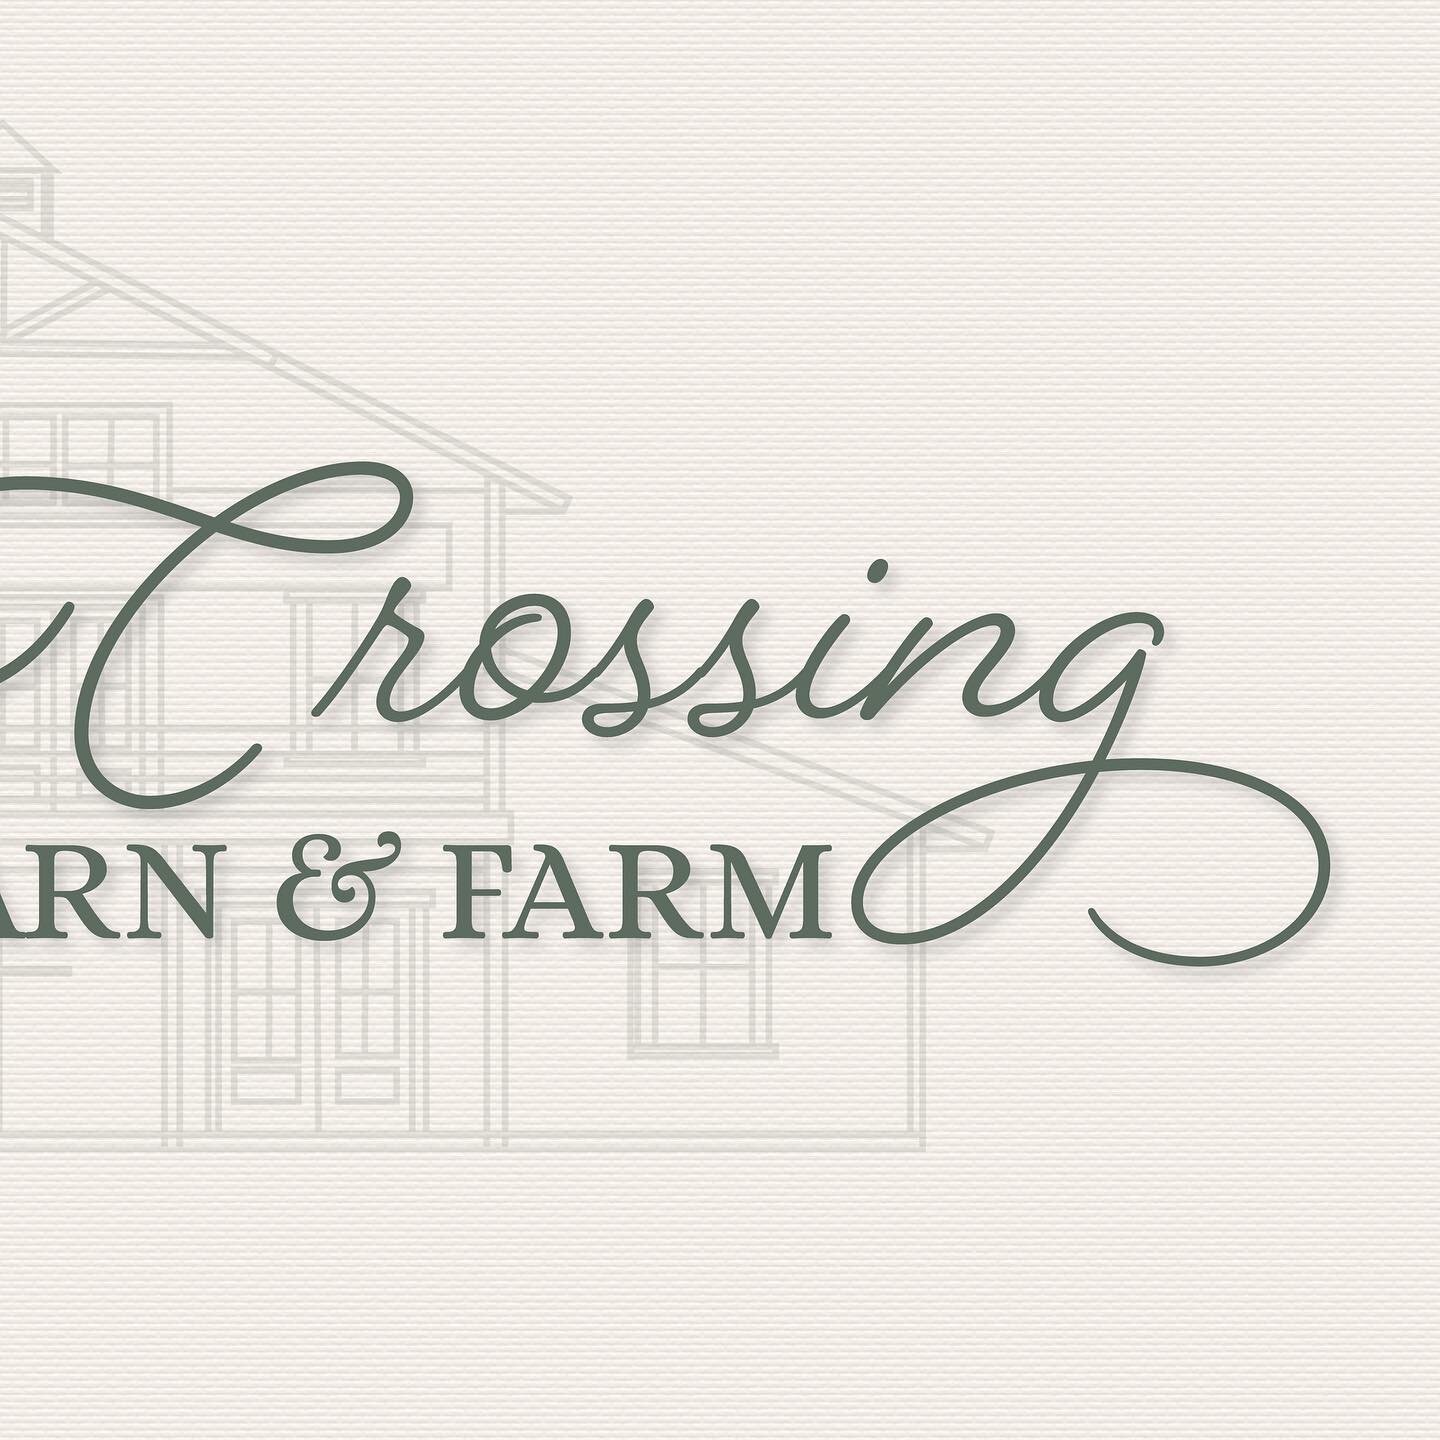 At King&rsquo;s Crossing Barn &amp; Farm their mission is&nbsp;to provide a beautiful venue to create memories of a lifetime, and also to promote the values of faith, family, and friendship ✨

We worked with Denise to kickstart her business and creat